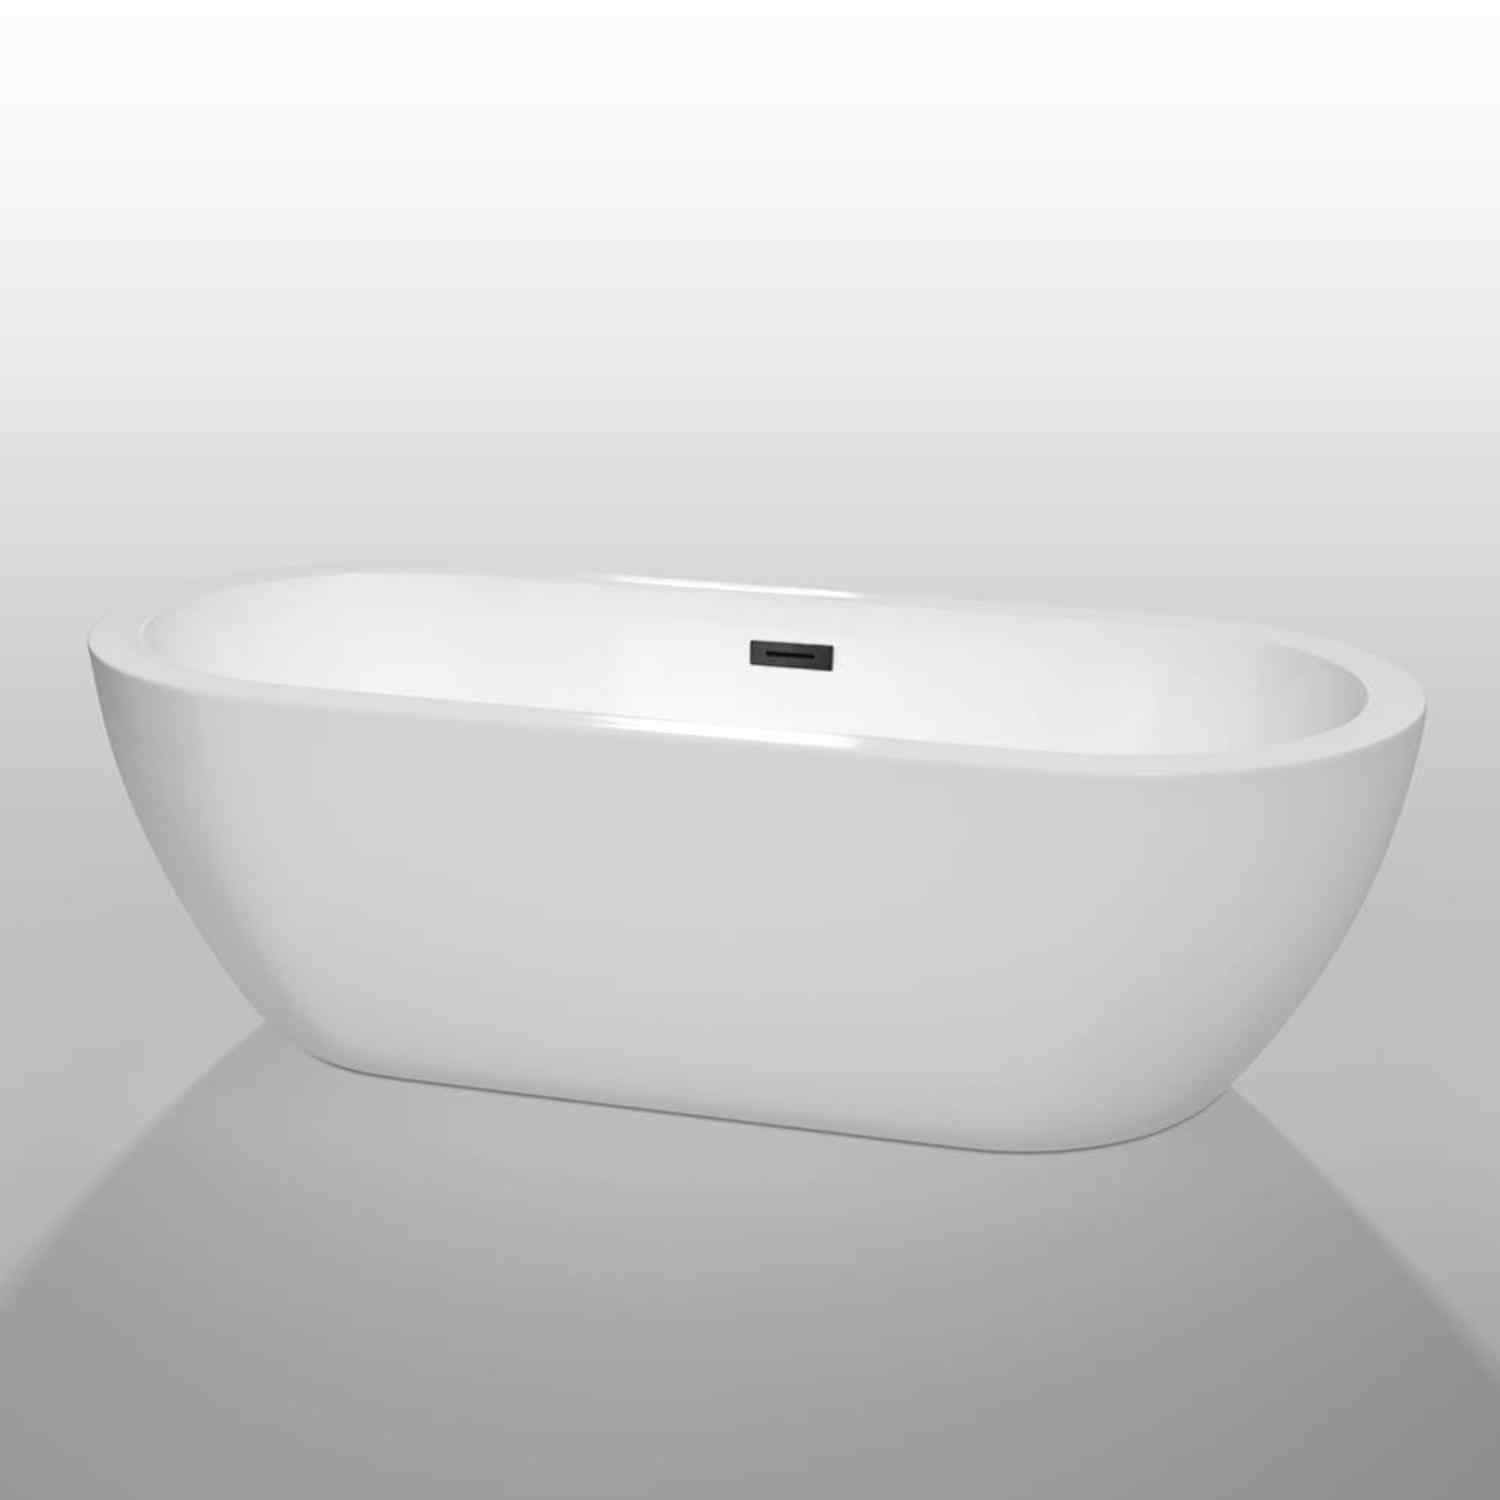 Wyndham collection Soho 72 Inch Freestanding Bathtub in White front view